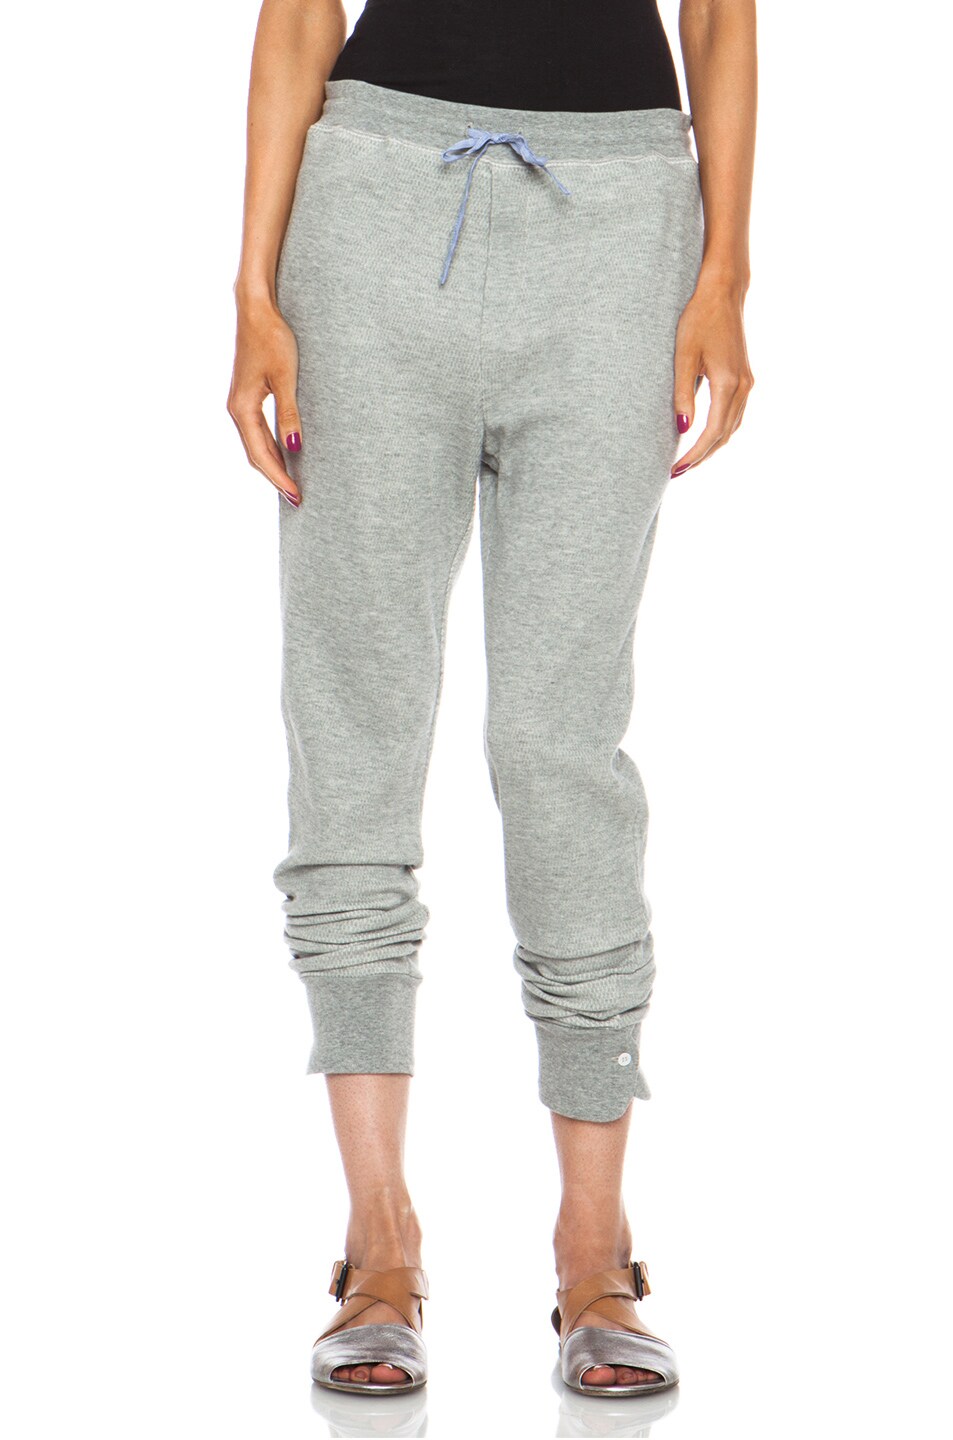 Image 1 of Band of Outsiders Woven Pocket Terry Sweatpant in Heather Grey